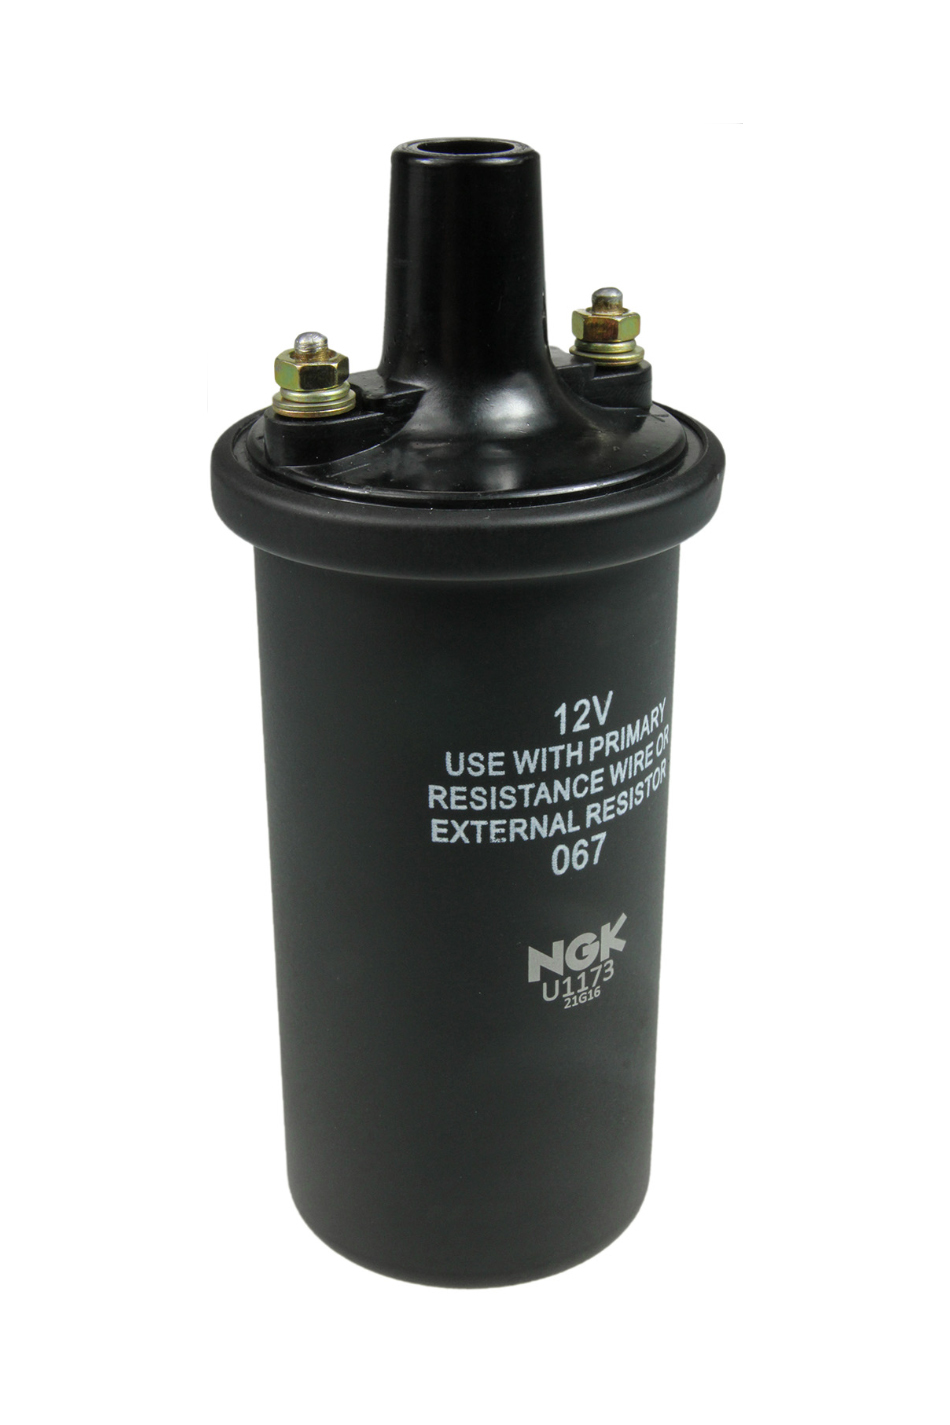 NGK U1173 Ignition Coil, Oil Filled Canister, OE Specs, 2 Male Threaded Terminal, 12 VDC, Standard Ignition, Black, Each